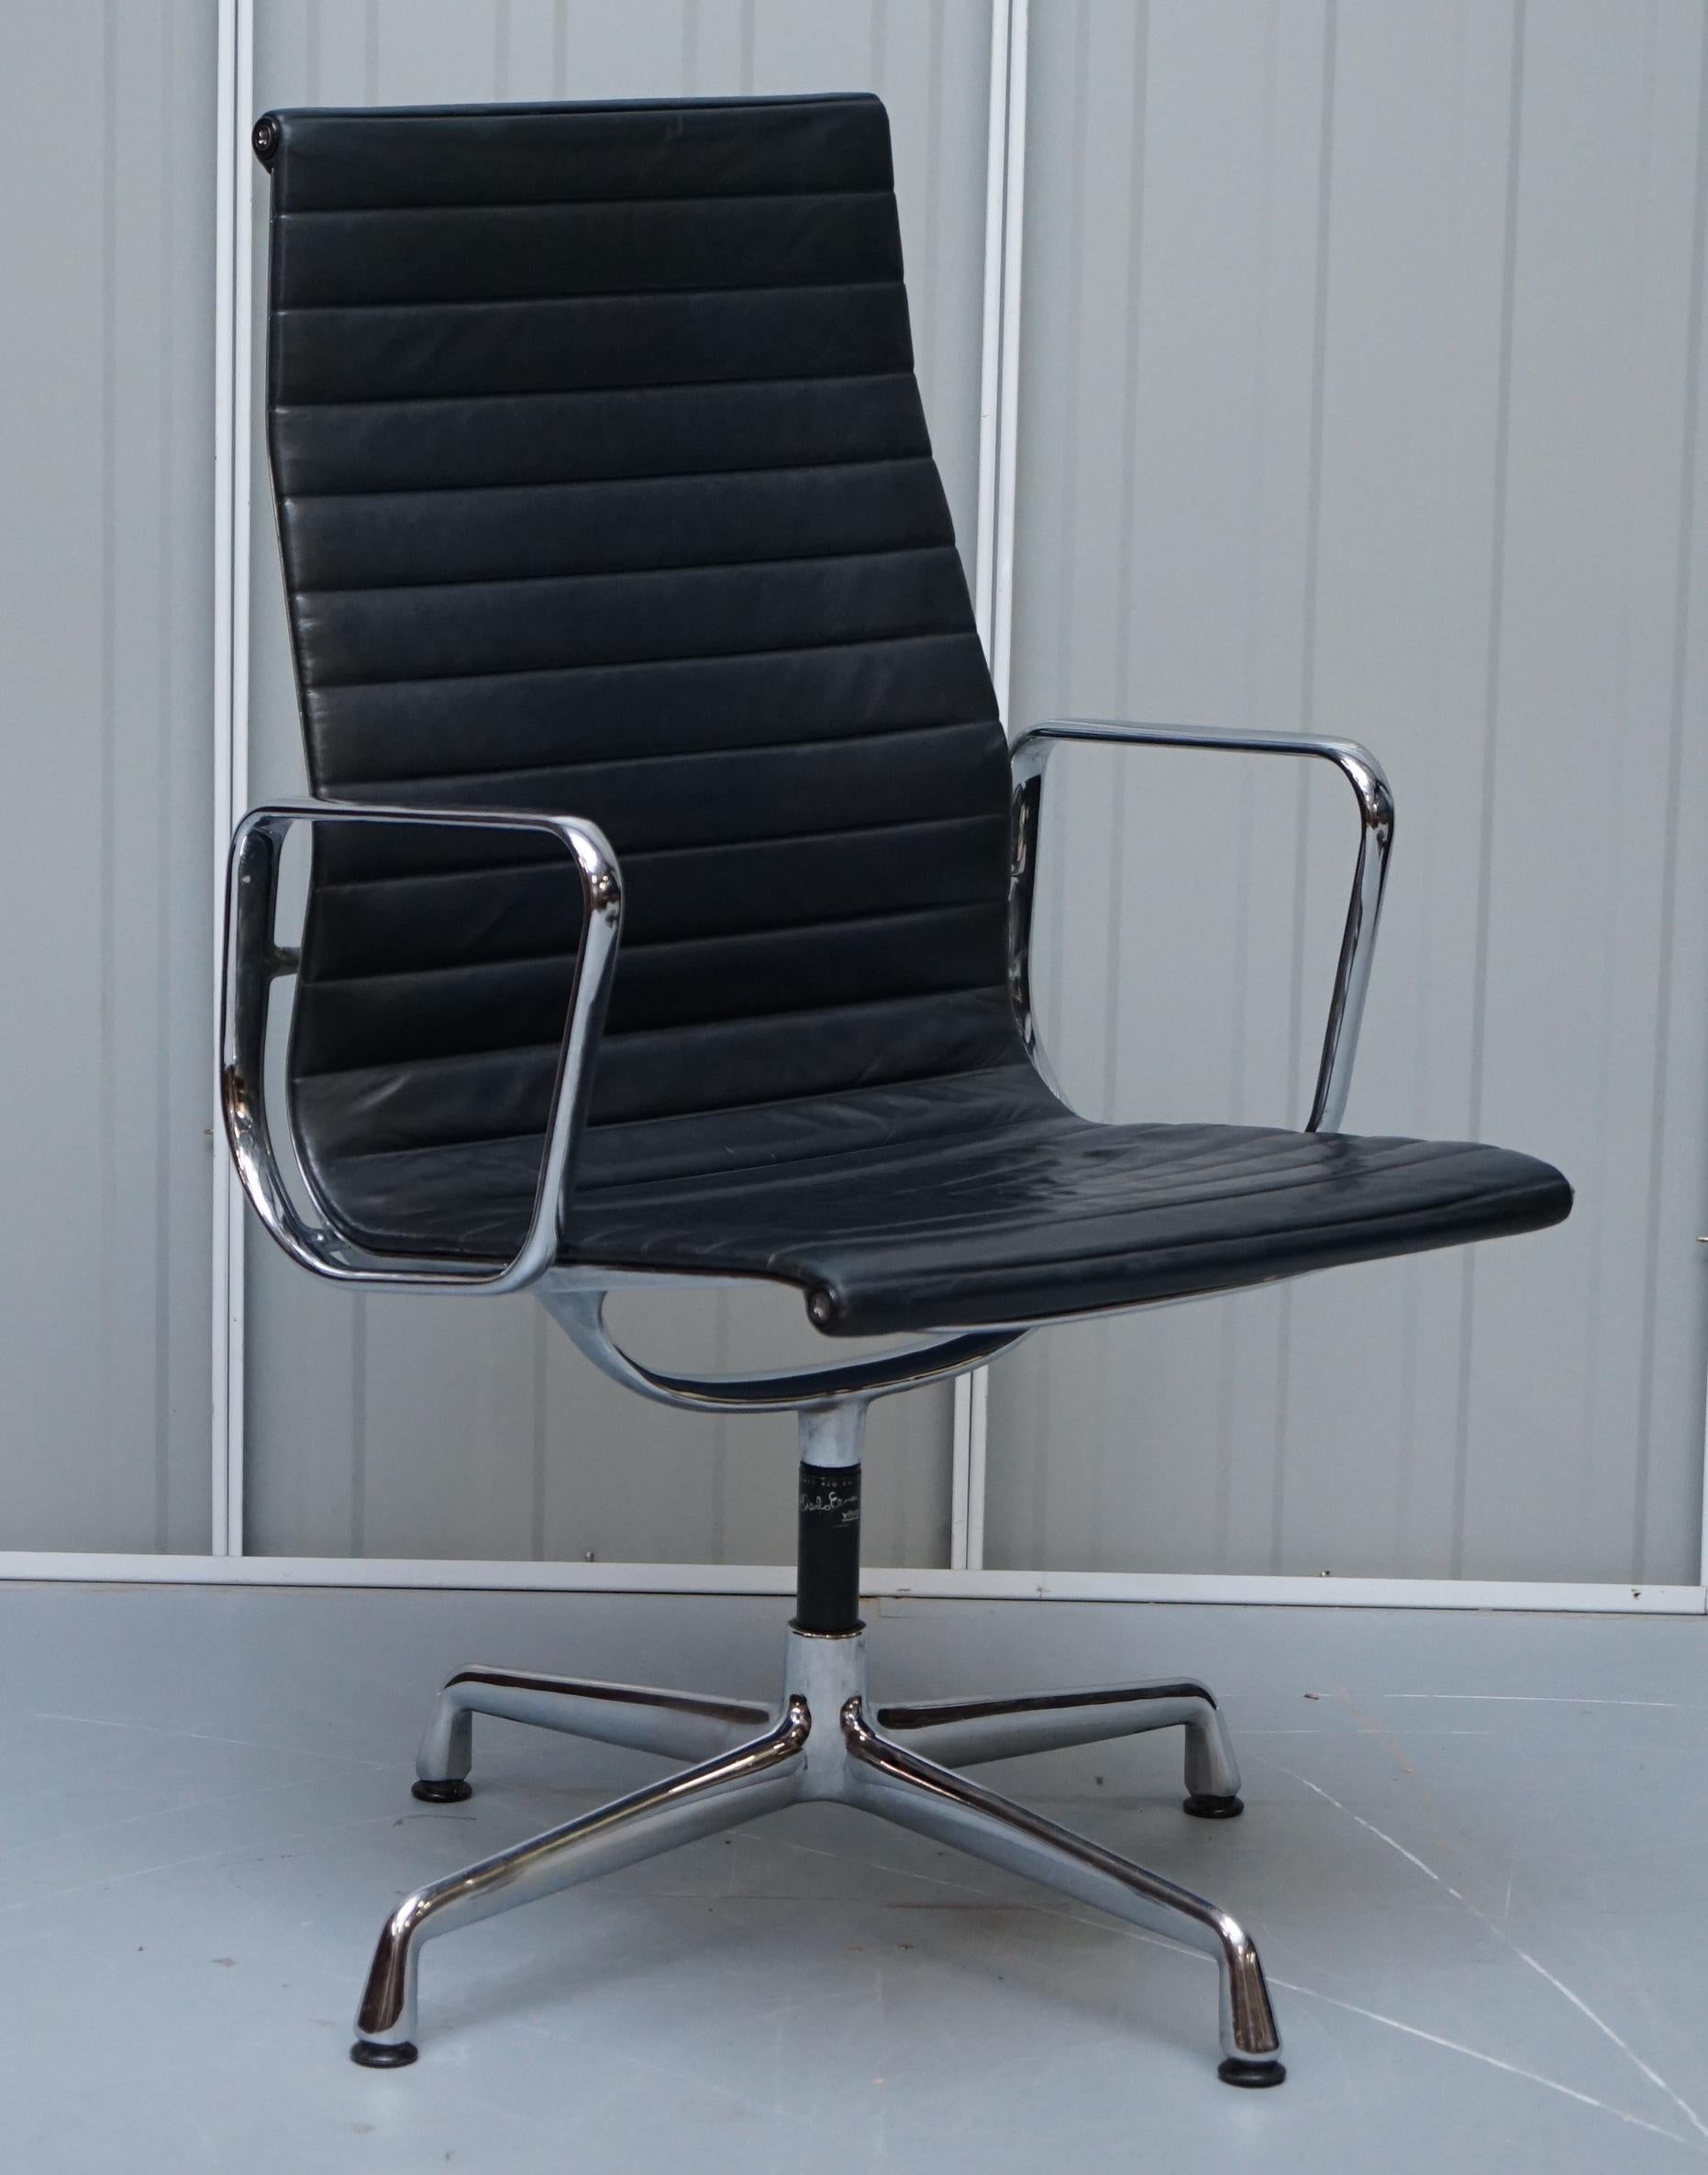 We are delighted to offer for sale 1 of 10 original vintage Charles & Rays Eames, Vitra, Herman Miller high back black leather office swivel armchairs RRP £34,000

These chairs are just about as iconic and well known as any piece of furniture in